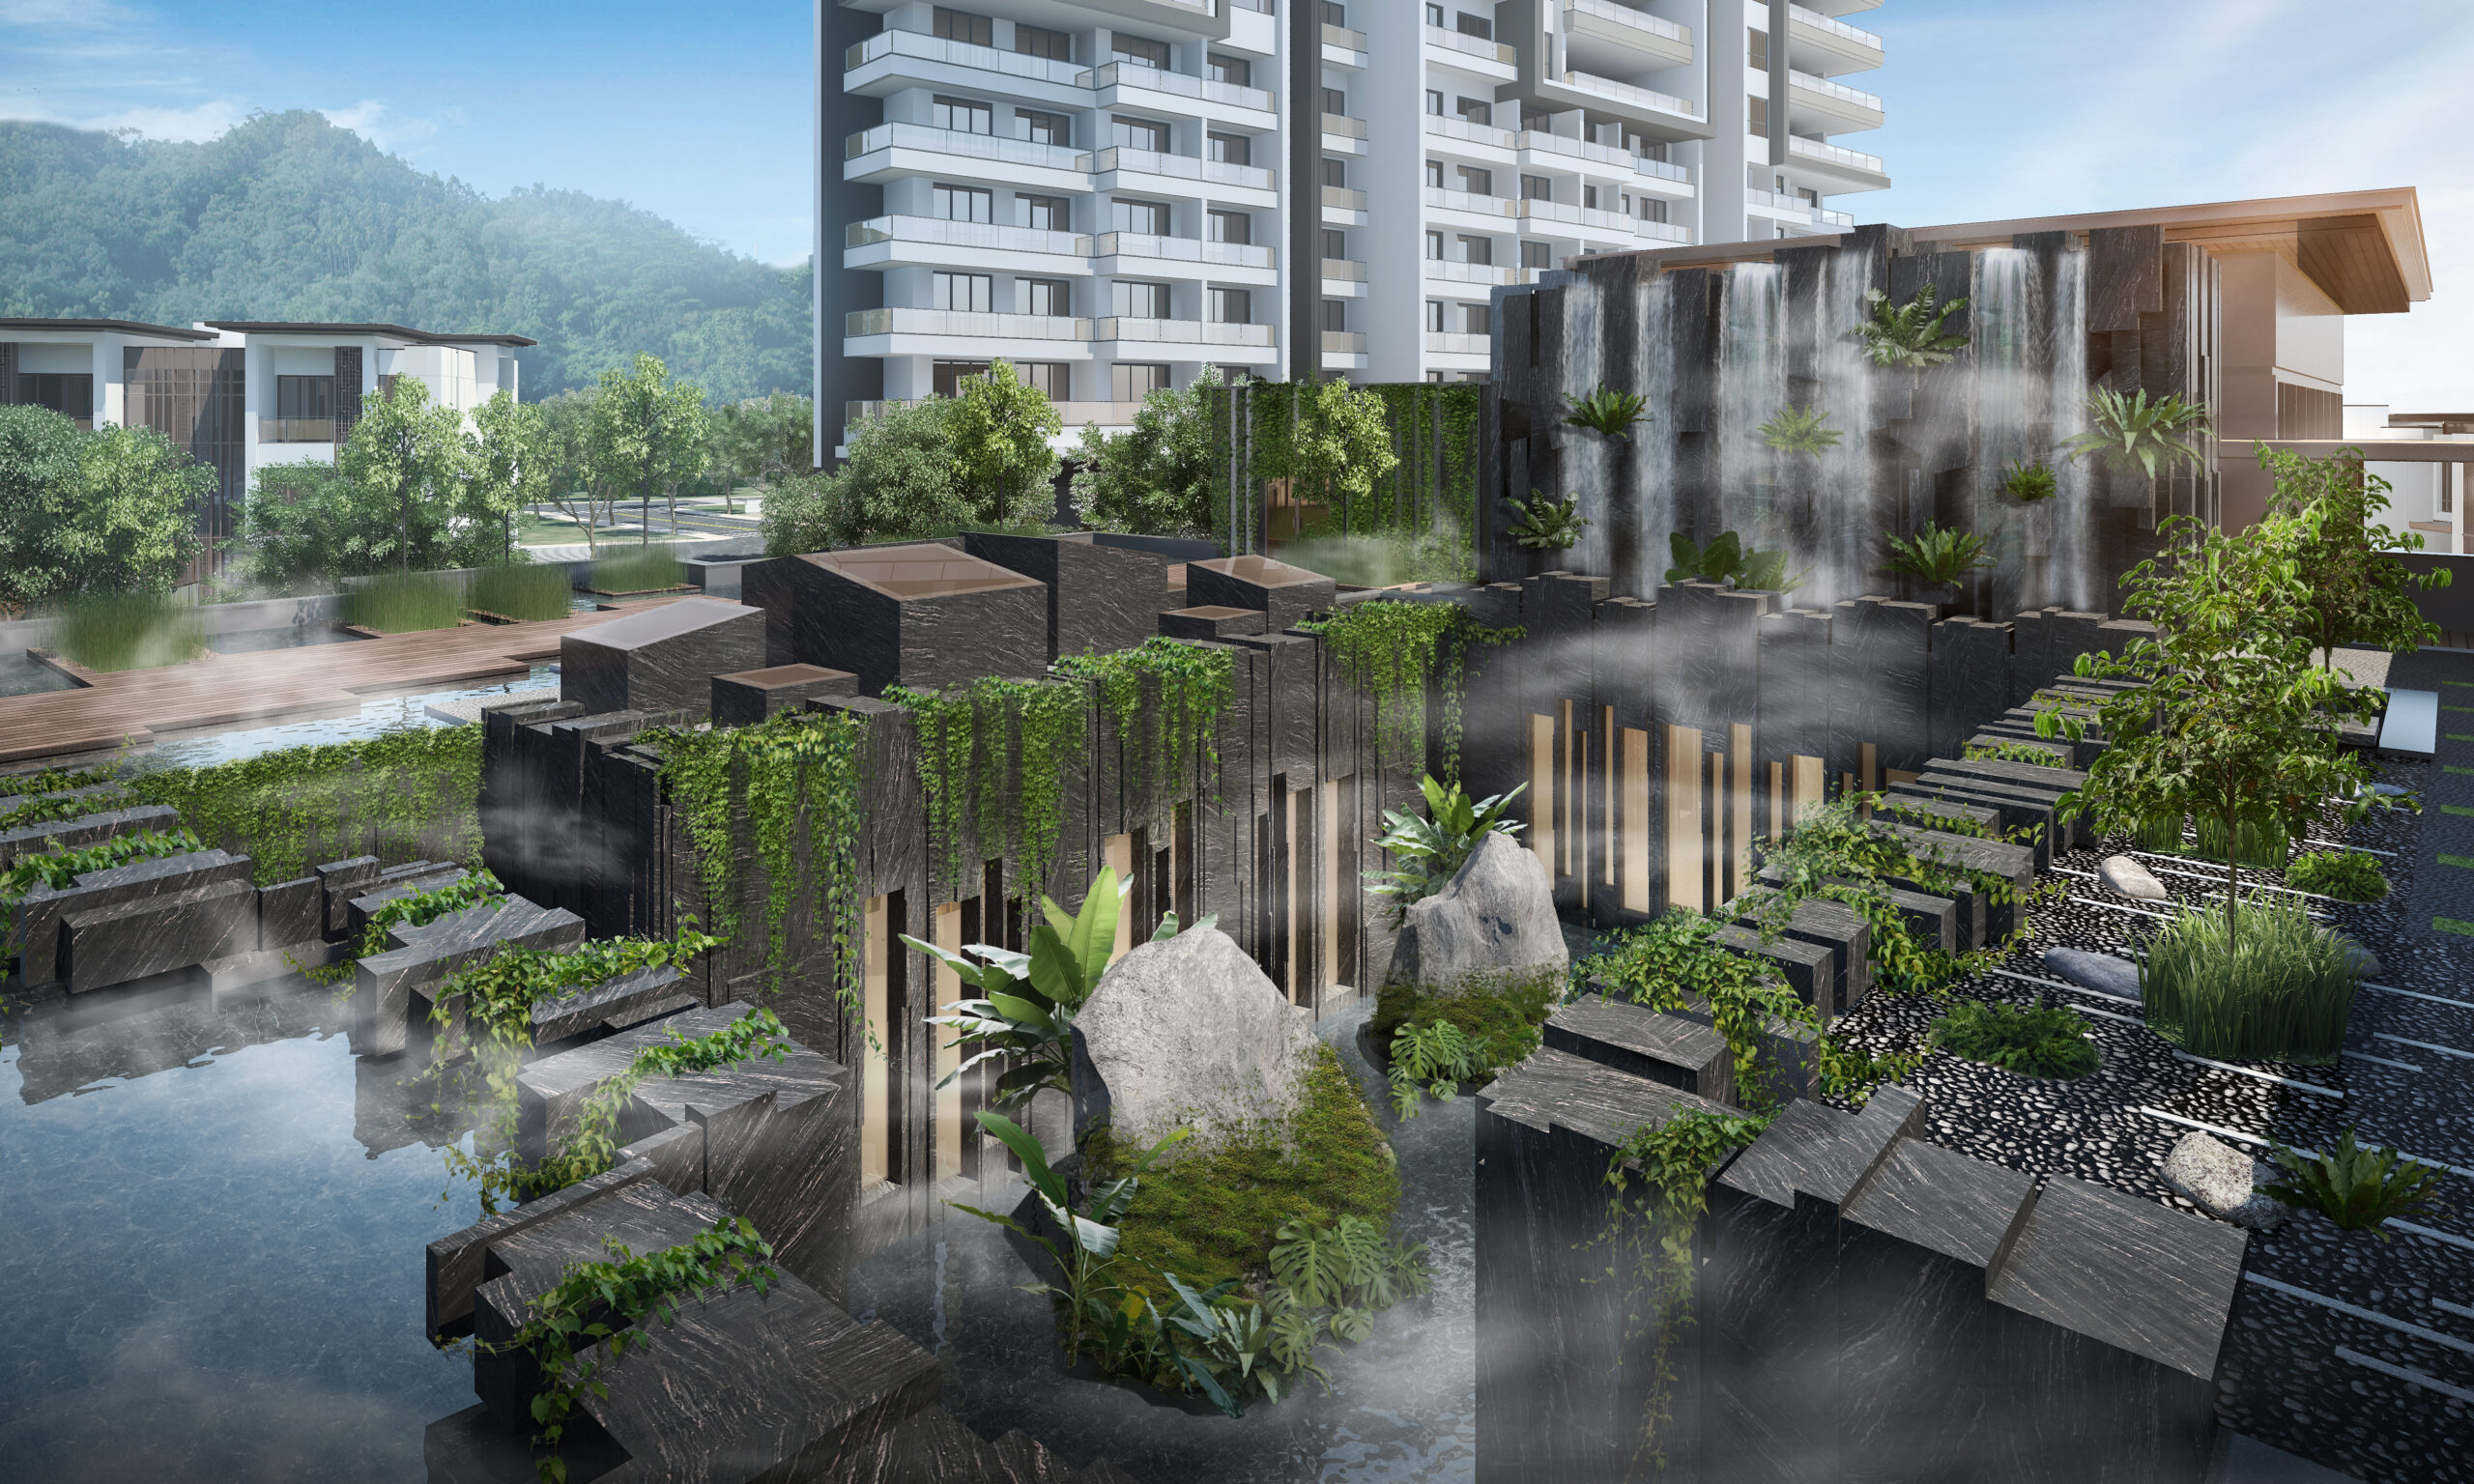 landscape and architecture design at the intercontinental halong bay. dramatic waterfalls.